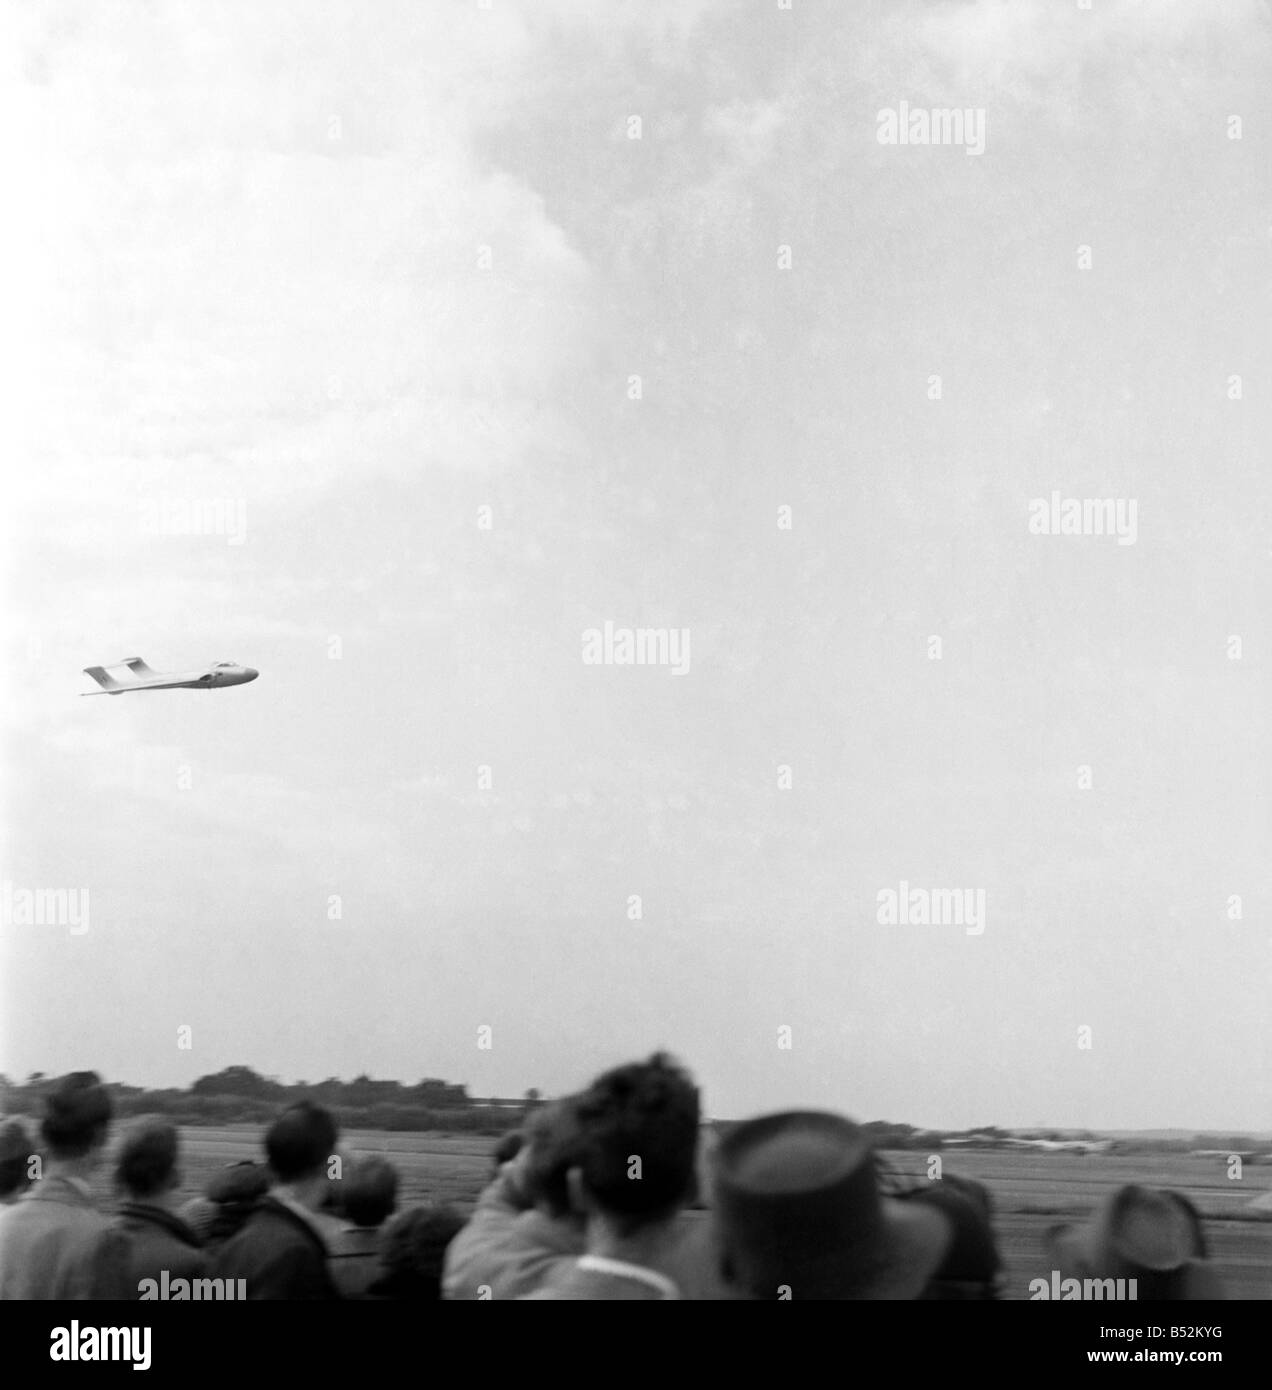 Thousands of spectators watched as a De Havilland 110 aircraft broke the sound barrier and then disintegrated in the sky above them and fell to earth.;Thirty-one people, including pilot John Derry, were killed. Dozens more were wounded at the Farnborough Air Show in Hampshire on 6 September 1952.;John Derry became the first British pilot to break the sound barrier, during a record attempt exactly four years before the accident. September 1952 C4399 Stock Photo